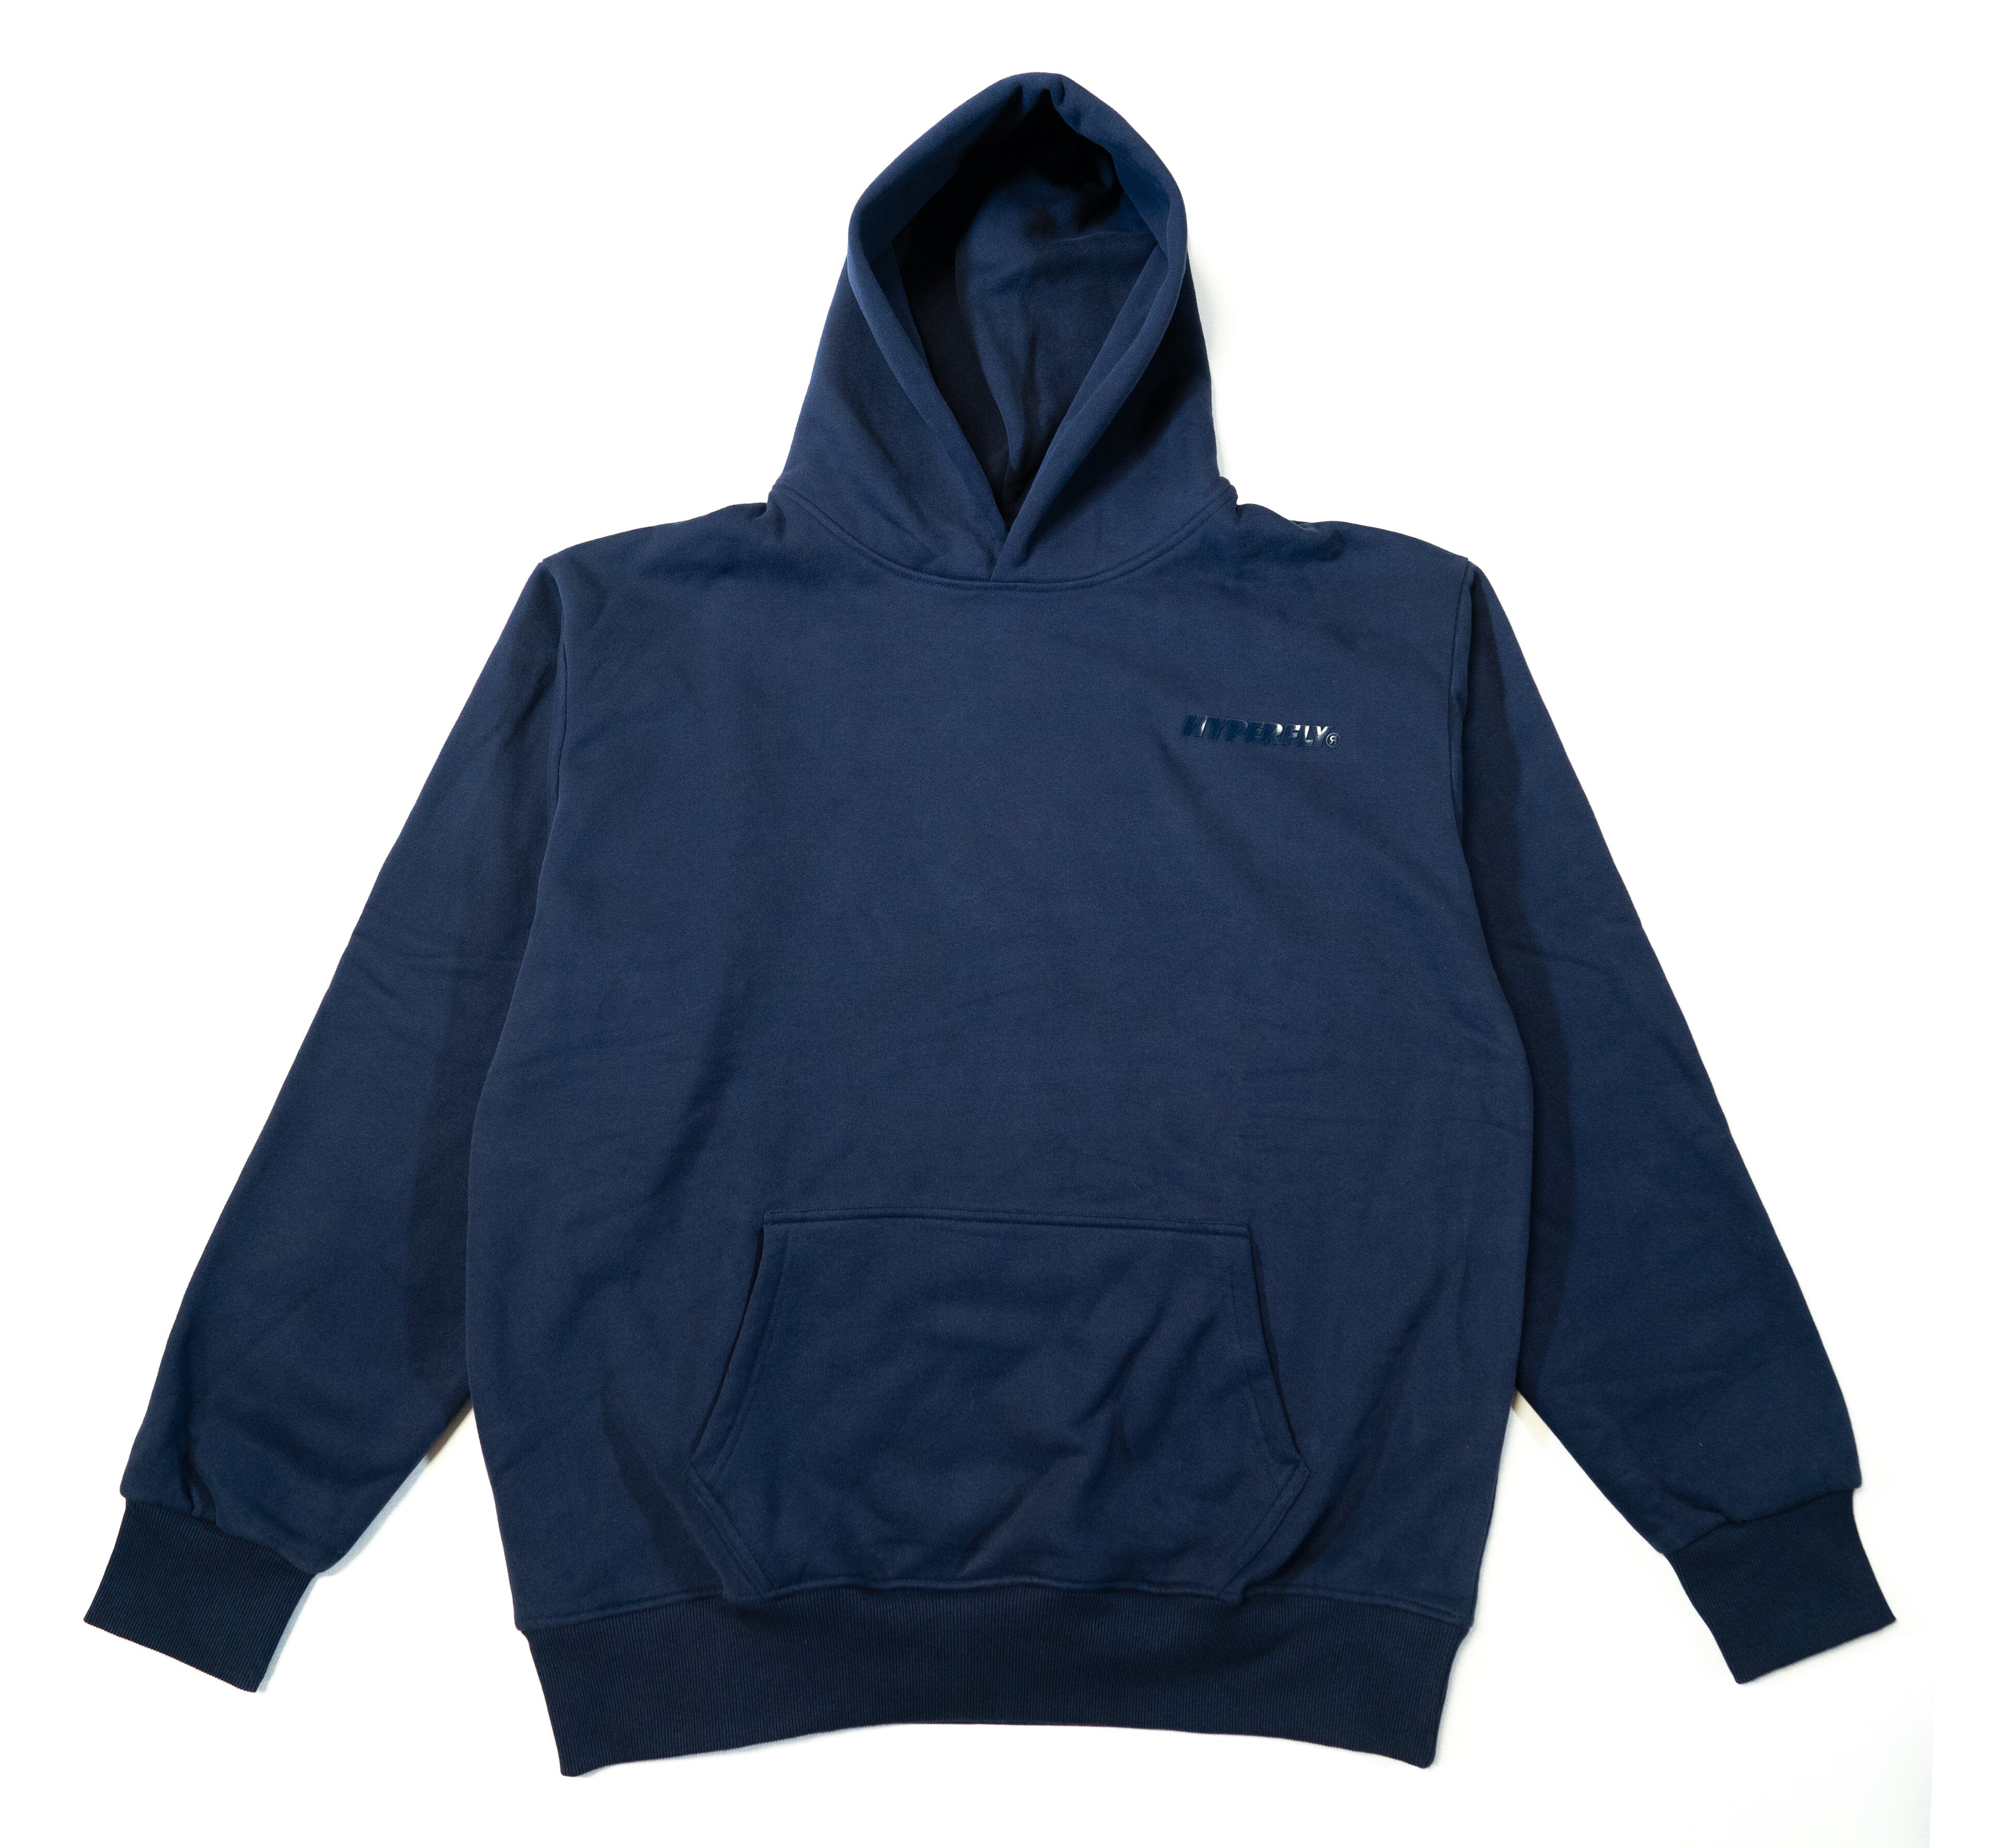 ButtaFly Hoodie Apparel - Outerwear Hyperfly Navy Small 